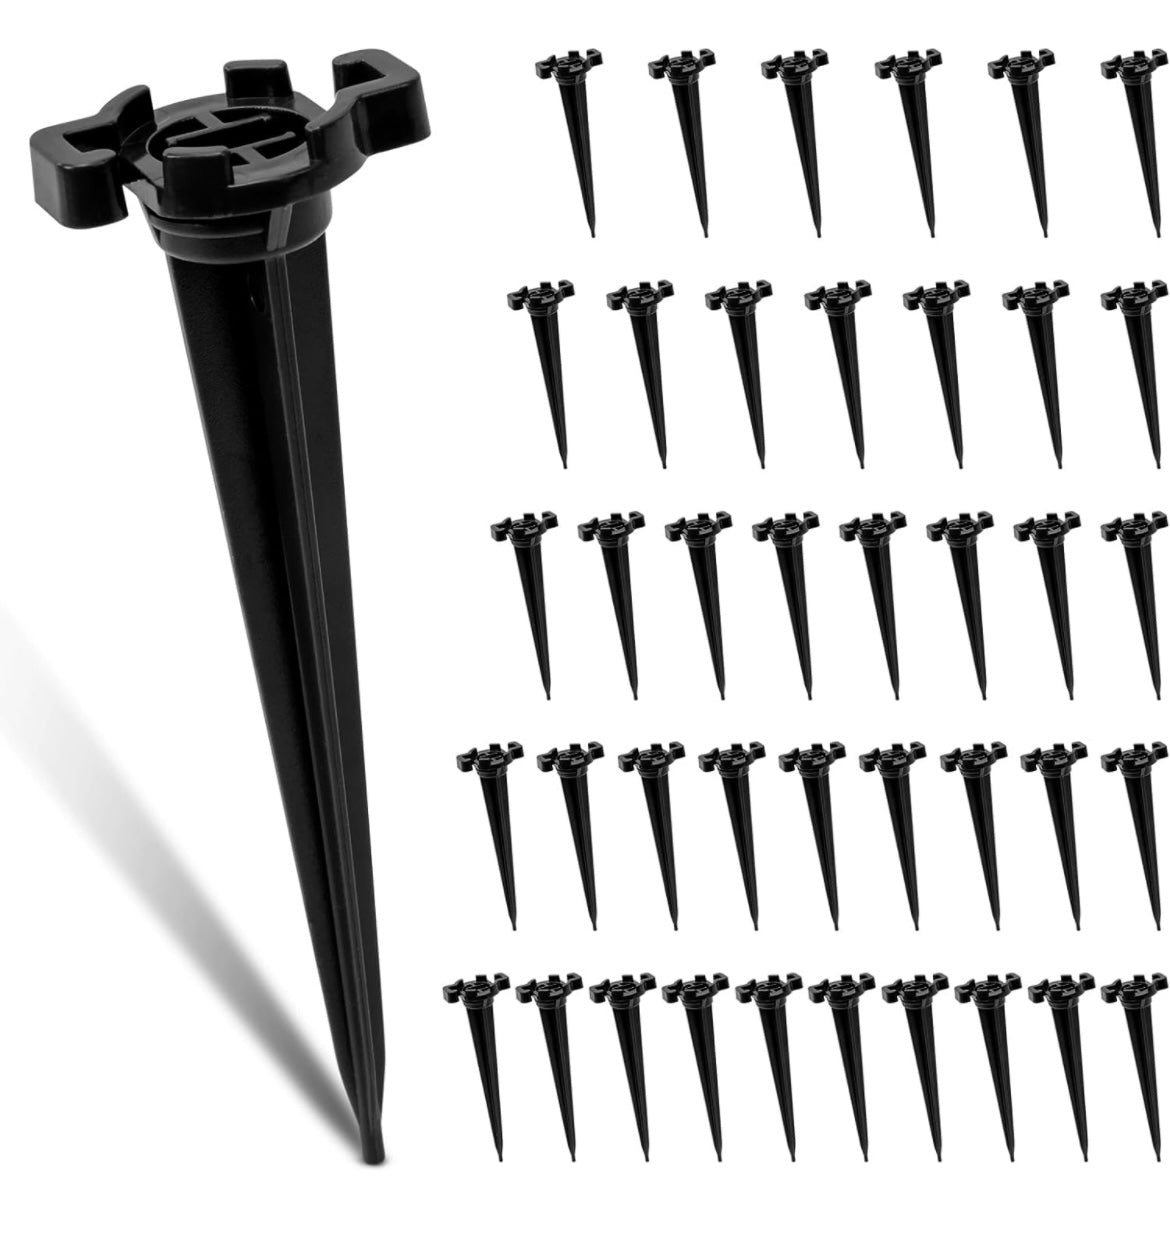 CEWOR 50pcs Christmas Yard Stakes, 4.5 Inch Plastic Light Stakes C7 C9 Light Stake Universal Light Stakes for Outdoor Holiday Lights Use on Garden Lawn Patio Path Walkway（Black）